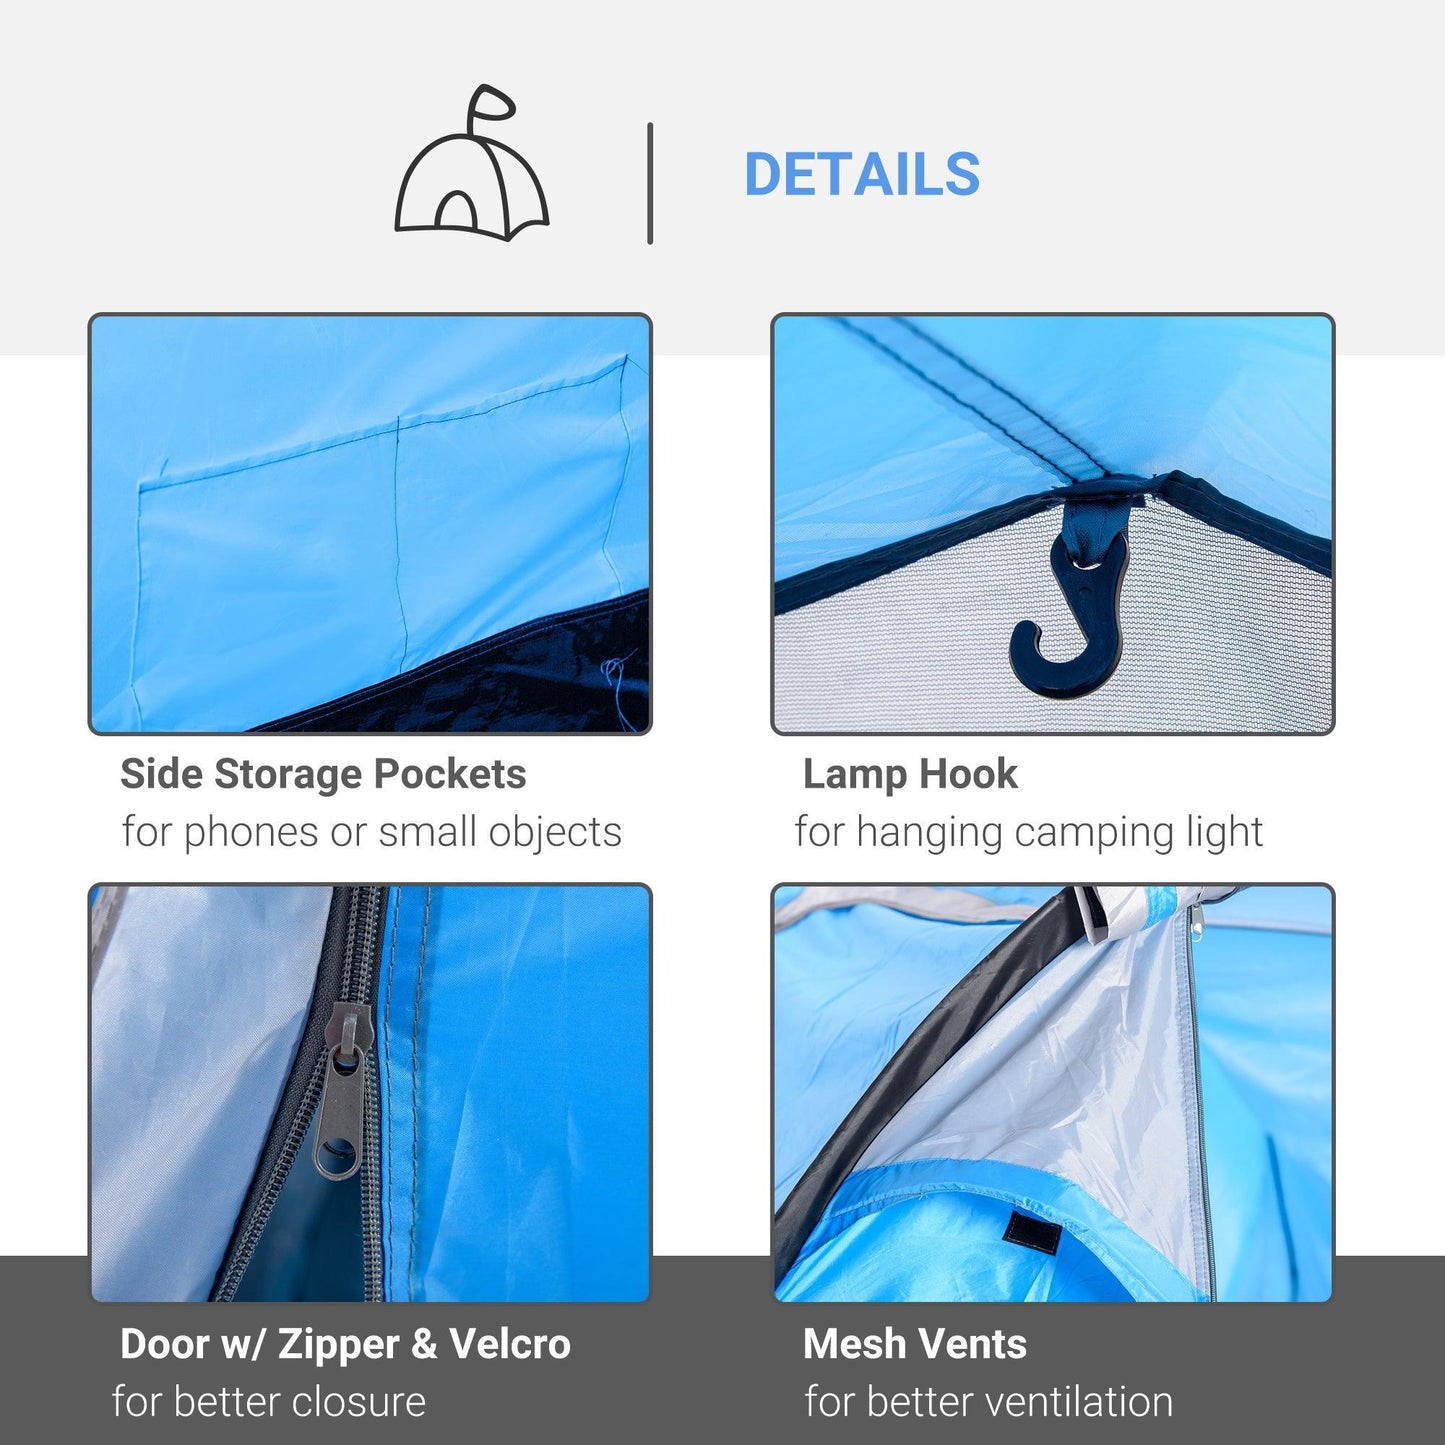 Outsunny Tunnel Tent: Weather-Resistant, 2-3 Person - ALL4U RETAILER LTD